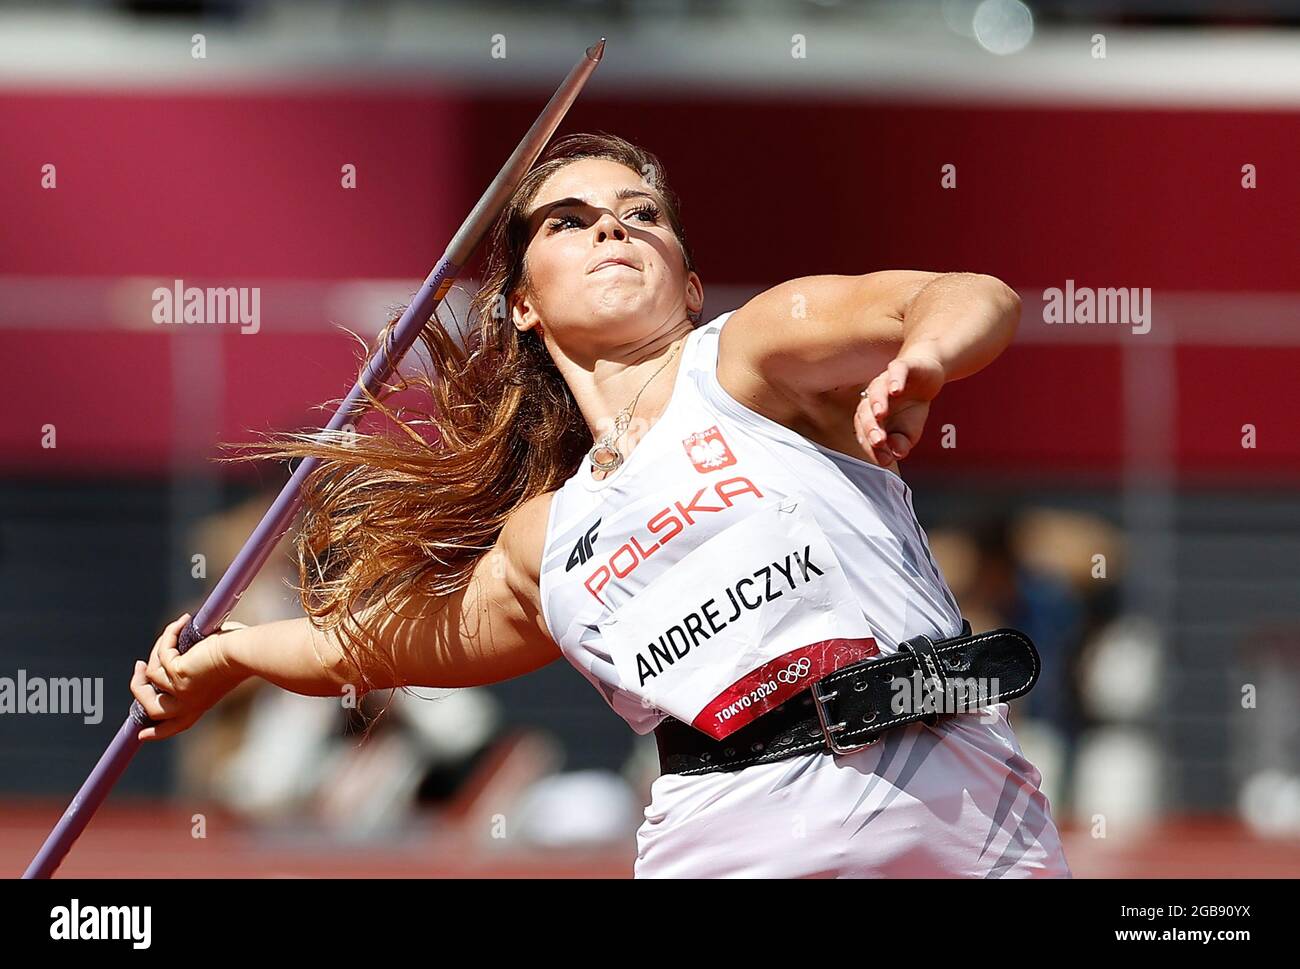 Tokyo, Japan. 3rd Aug, 2021. Maria Andrejczyk of Poland competes during the Women's Javelin Throw Qualification at the Tokyo 2020 Olympic Games in Tokyo, Japan, Aug. 3, 2021. Credit: Wang Lili/Xinhua/Alamy Live News Stock Photo